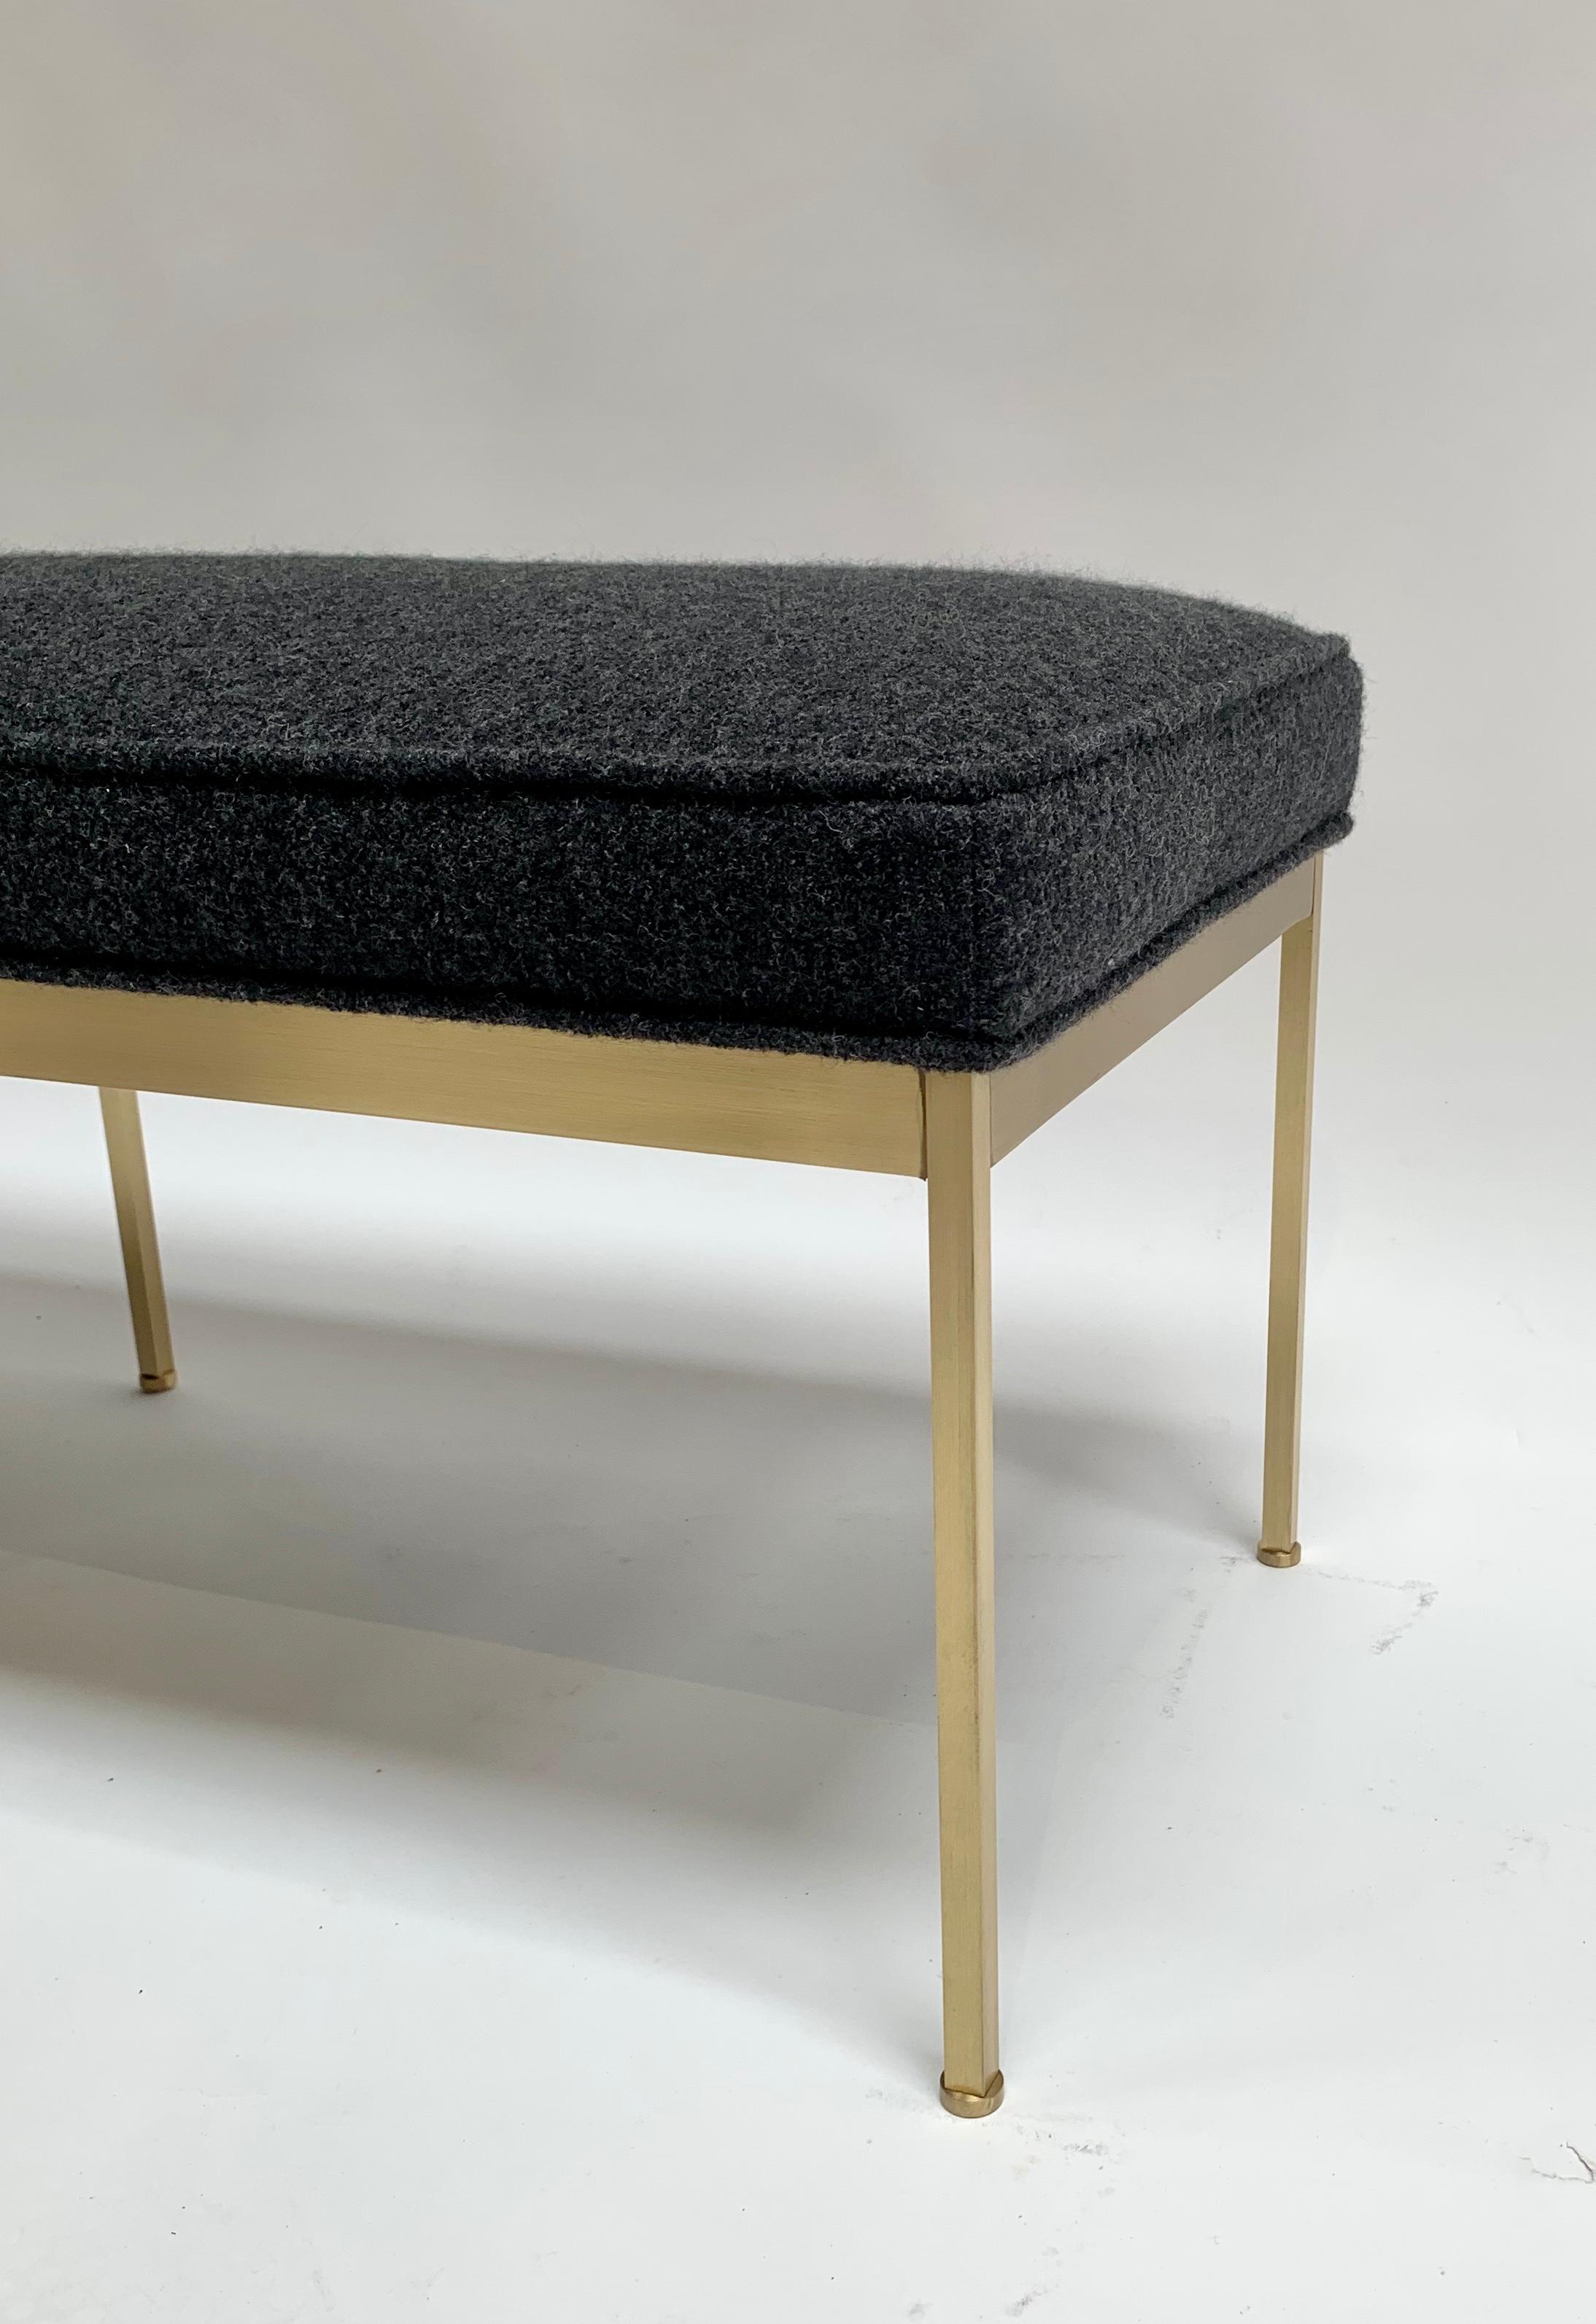 The Paul Bench features a solid lacquered brass base and an upholstered seat with piping. Each leg features a rounded leveler. Shown here in grey boiled wool and satin brass.

The Lawson-Fenning Collection is designed and handmade in Los Angeles,